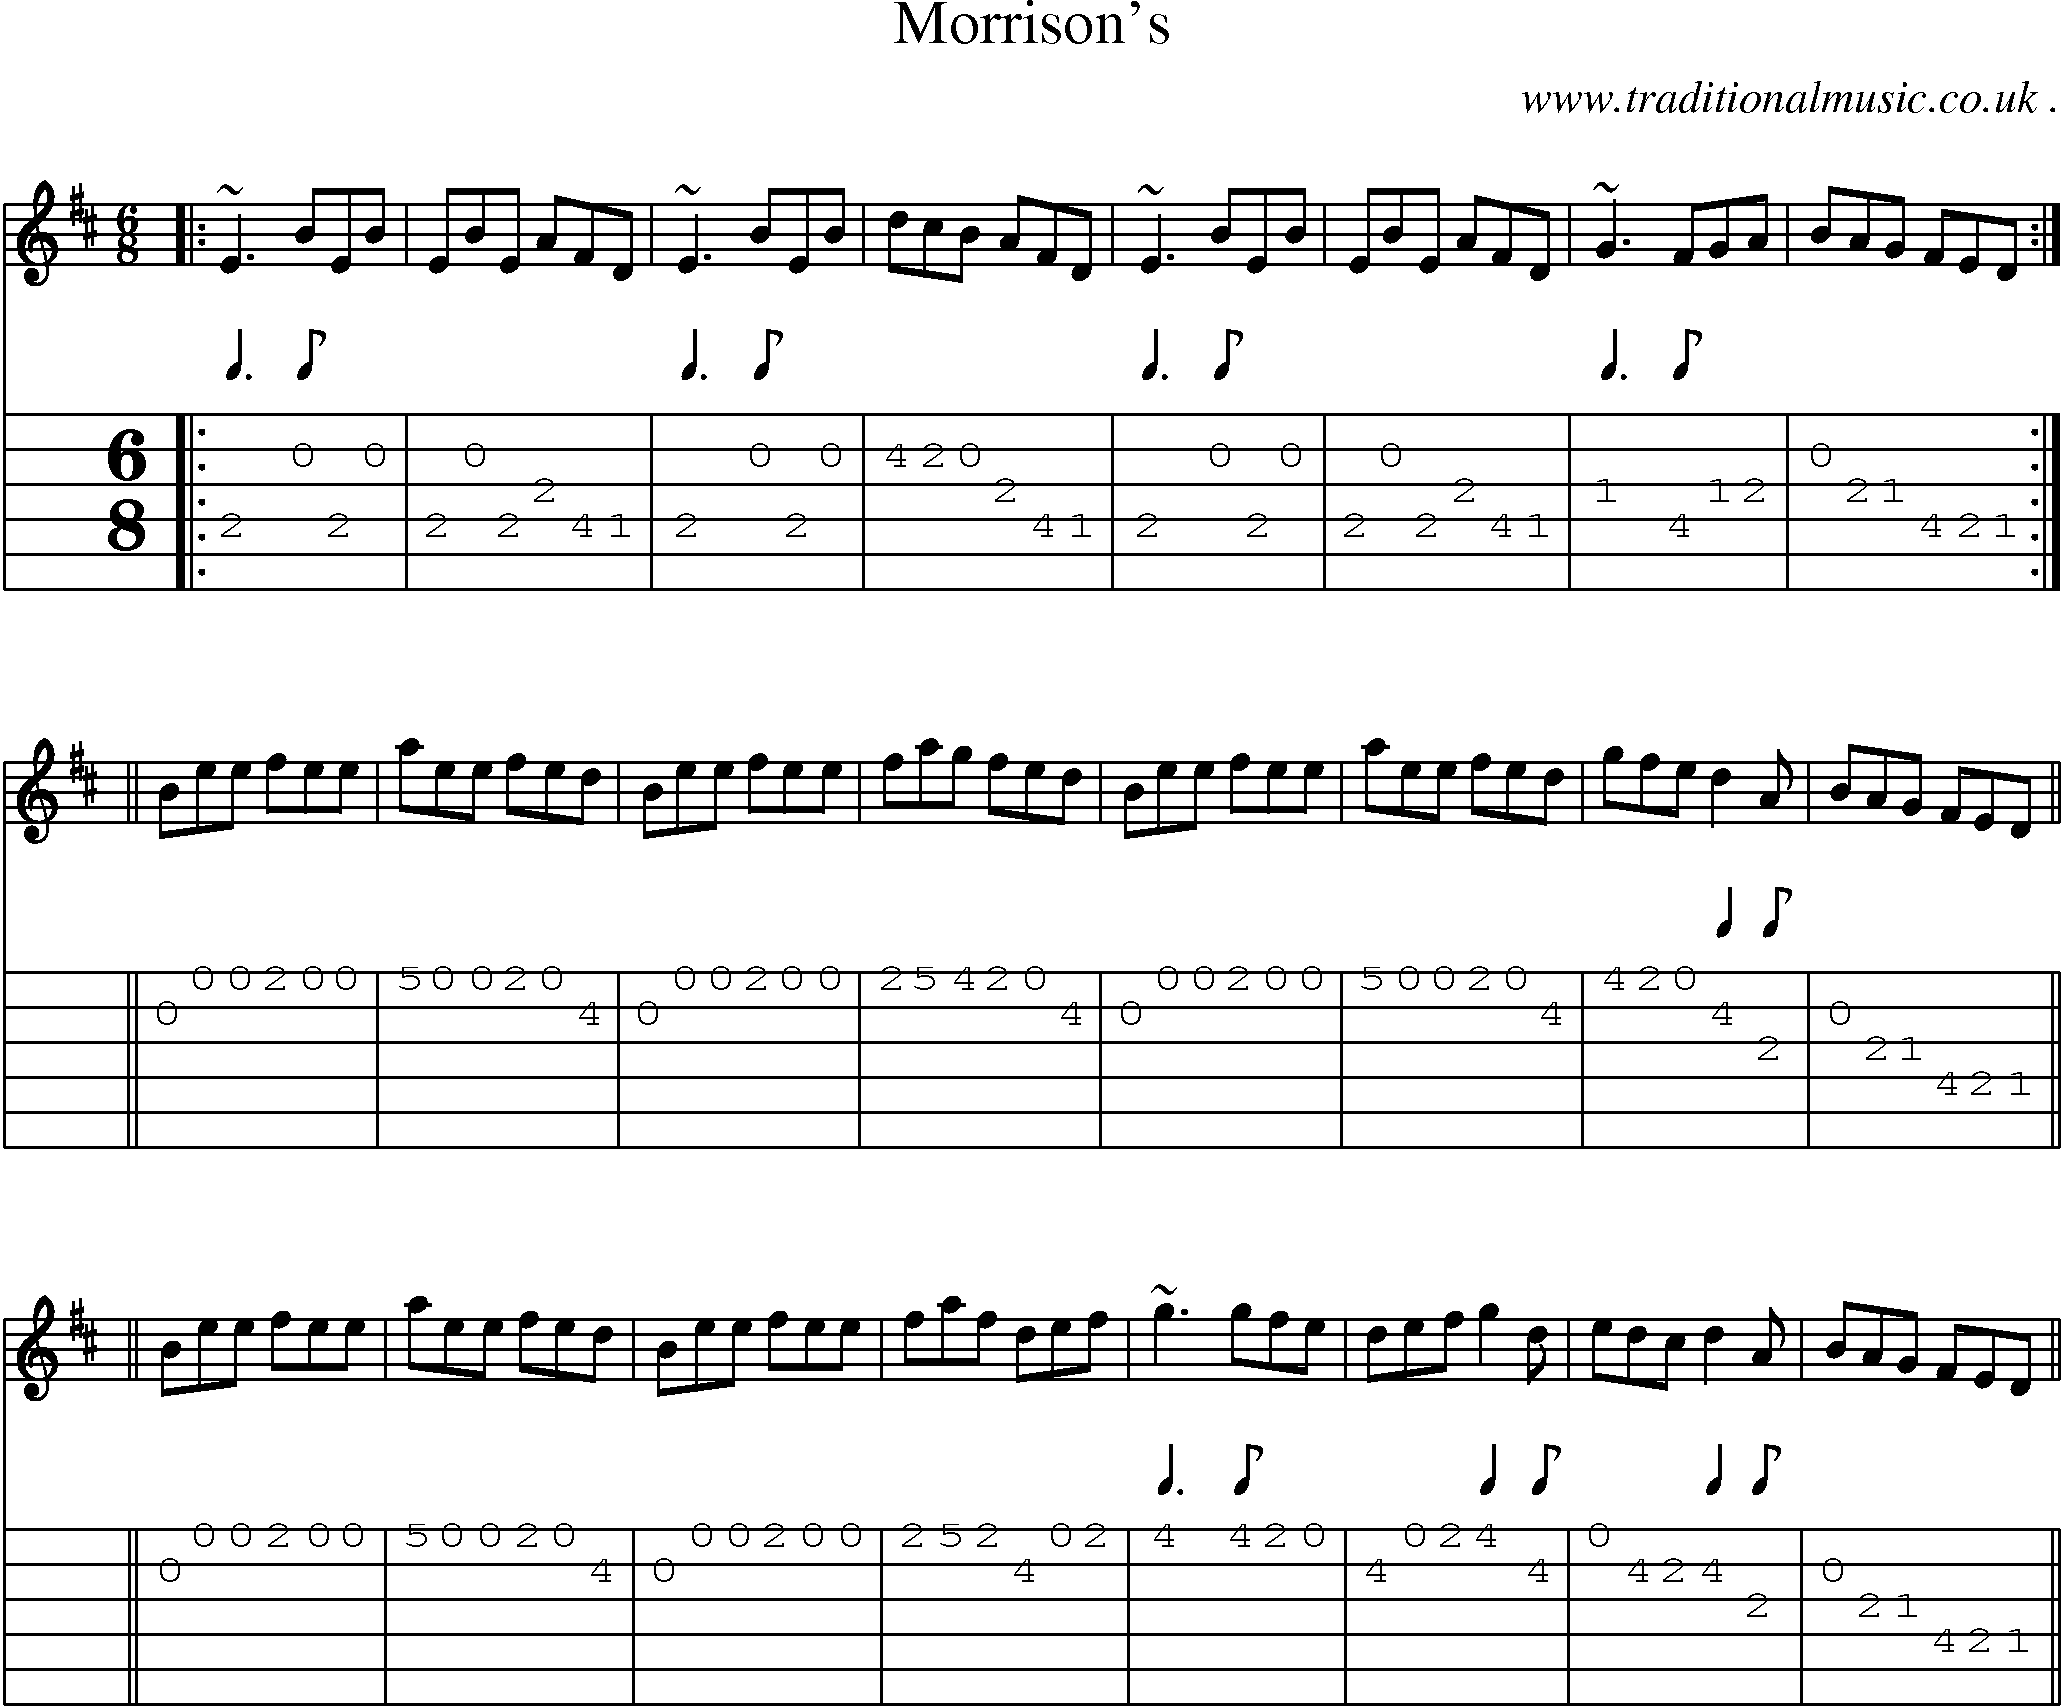 Sheet-music  score, Chords and Guitar Tabs for Morrisons